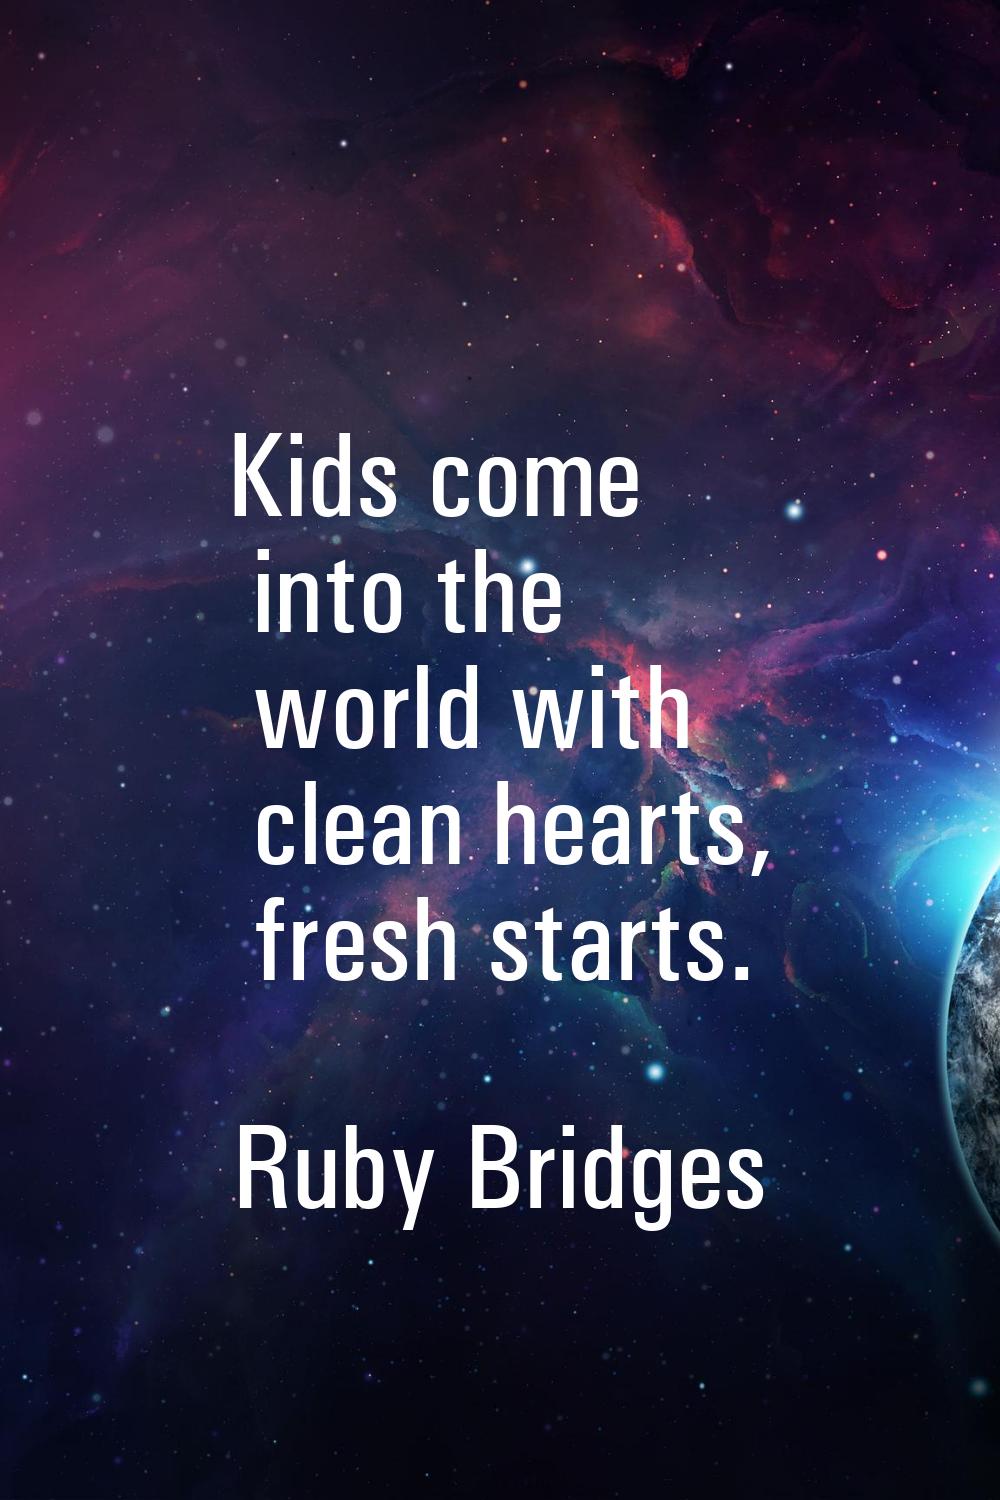 Kids come into the world with clean hearts, fresh starts.